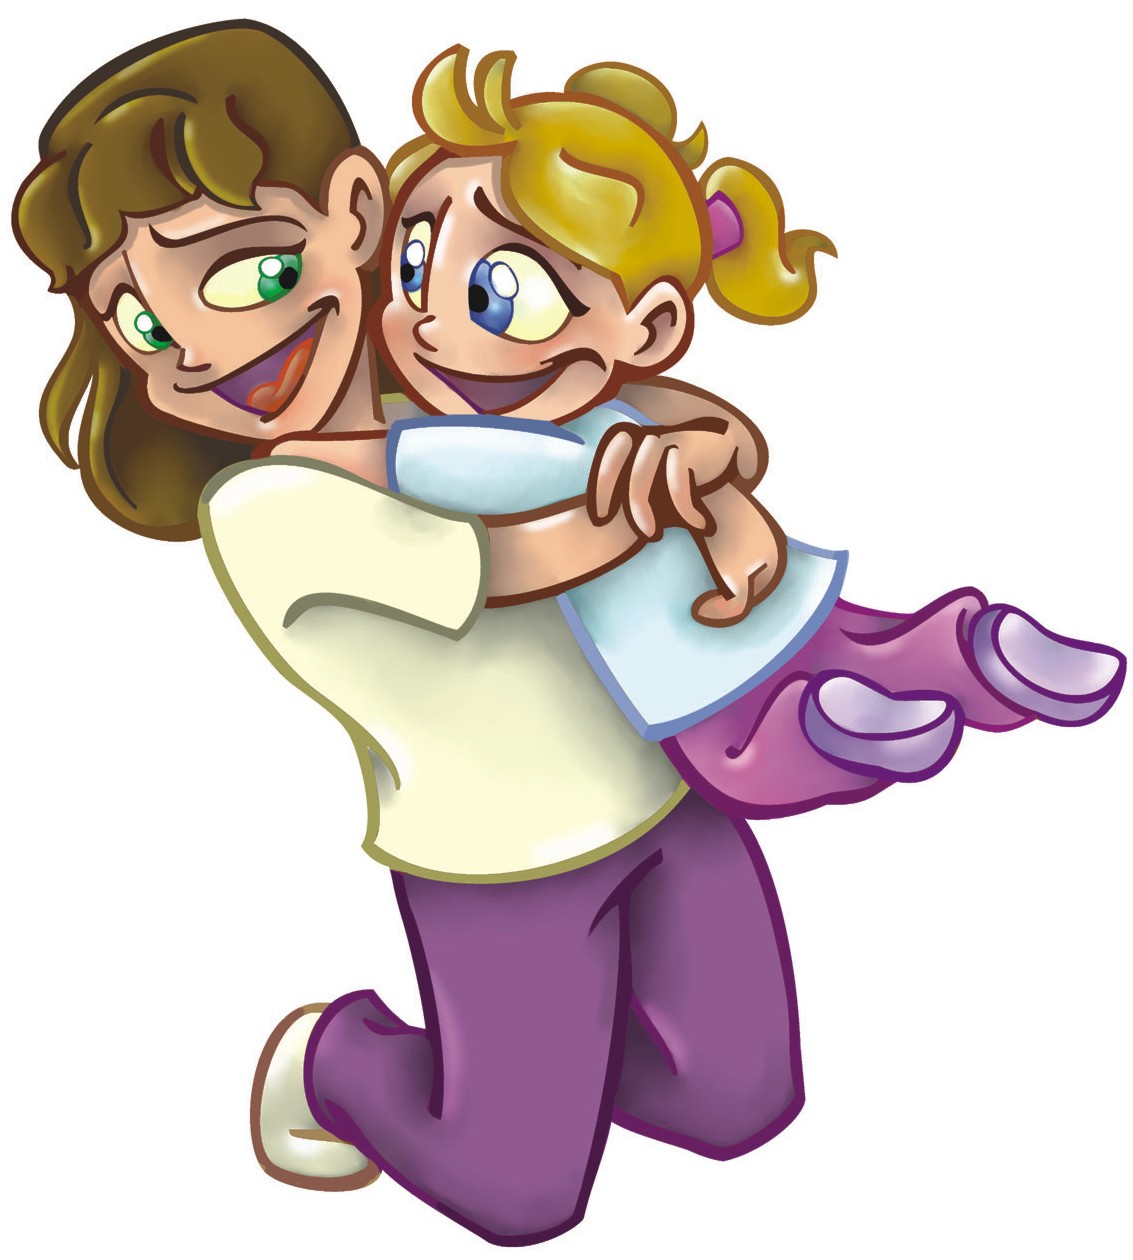 ... Hugging Clipart - clipart